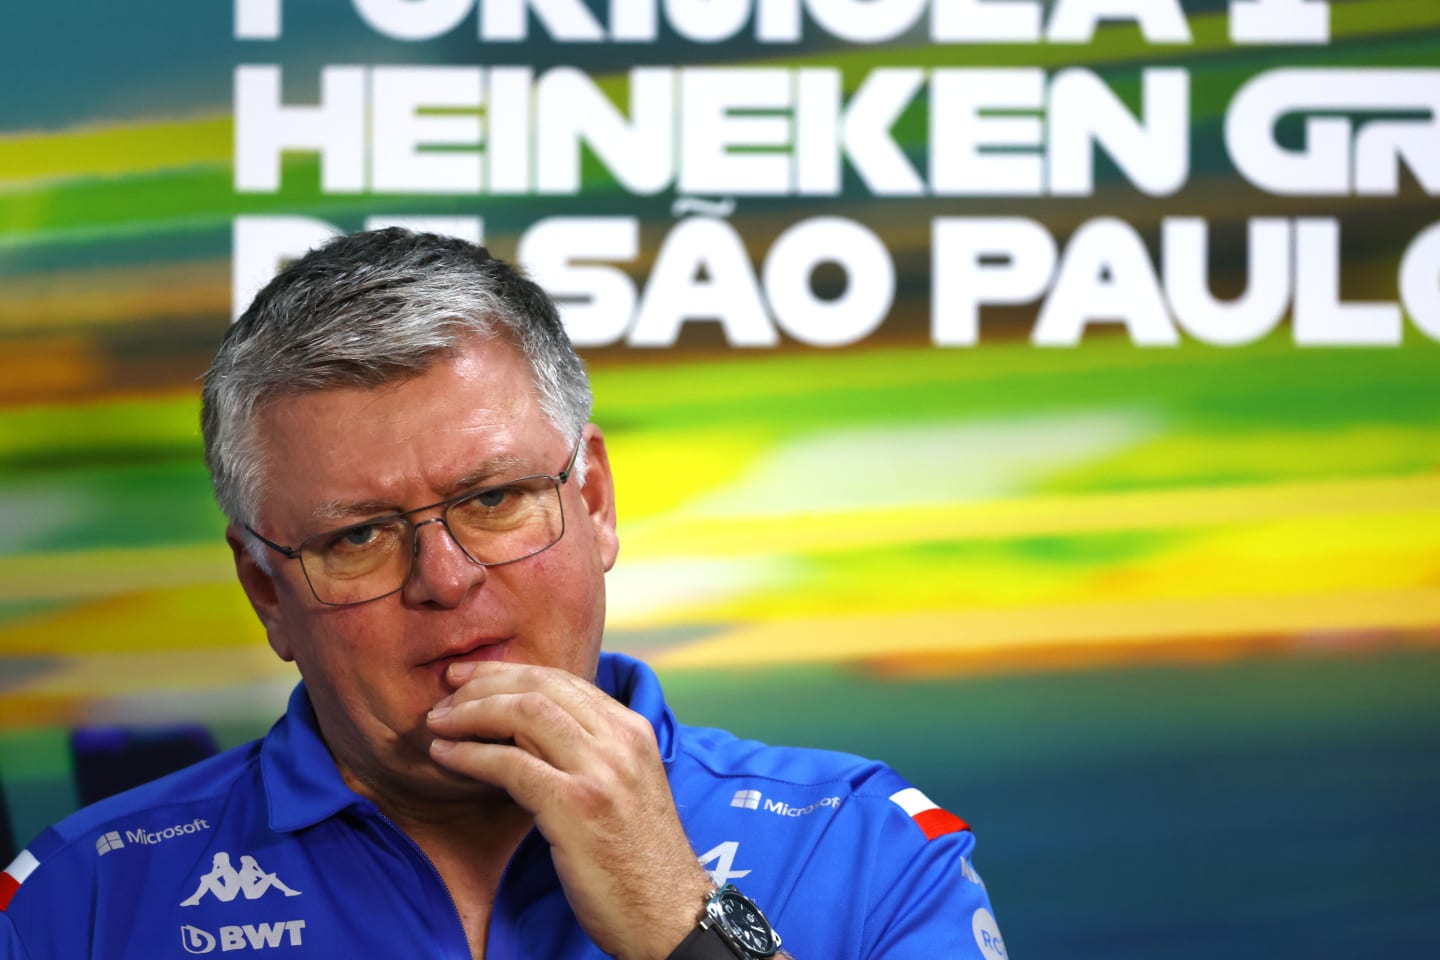 SAO PAULO, BRAZIL - NOVEMBER 12: Otmar Szafnauer, Team Principal of Alpine F1 attends a press conference prior to practice ahead of the F1 Grand Prix of Brazil at Autodromo Jose Carlos Pace on November 12, 2022 in Sao Paulo, Brazil. (Photo by Bryn Lennon/Getty Images)